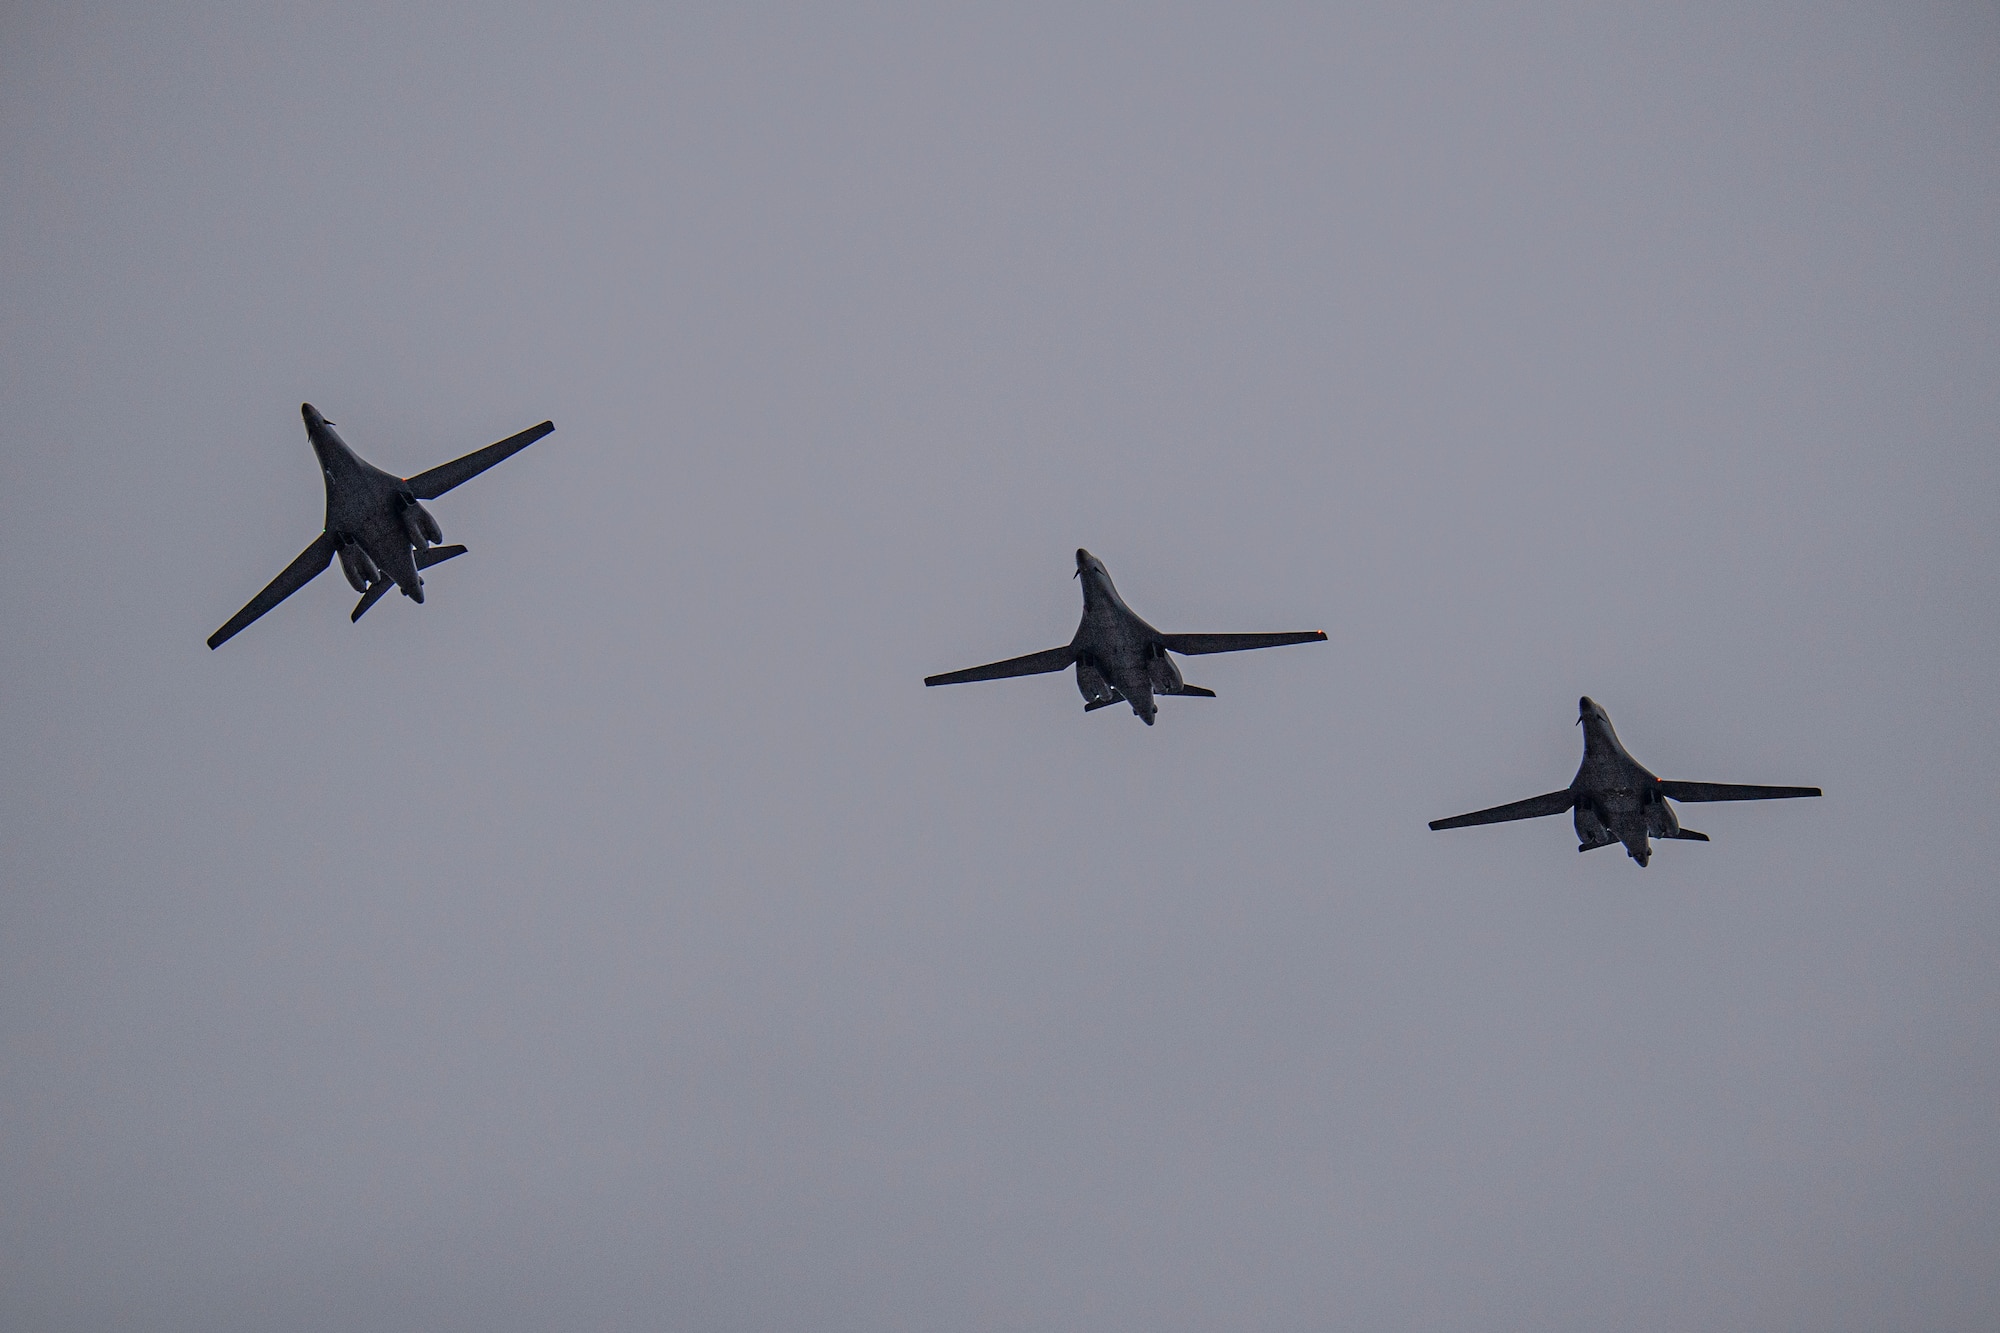 Three B-1B Lancers assigned to the 9th Expeditionary Bomb Squadron fly in formation over Ørland Air Force Station, Norway, in support of a Bomber Task Force deployment, Feb. 22, 2021. The B-1 is a highly-versatile, supersonic, multi-mission weapon system that carries the largest payload of both guided and unguided weapons in the United States Air Force’s inventory. (U.S. Air Force photo by Airman 1st Class Colin Hollowell)